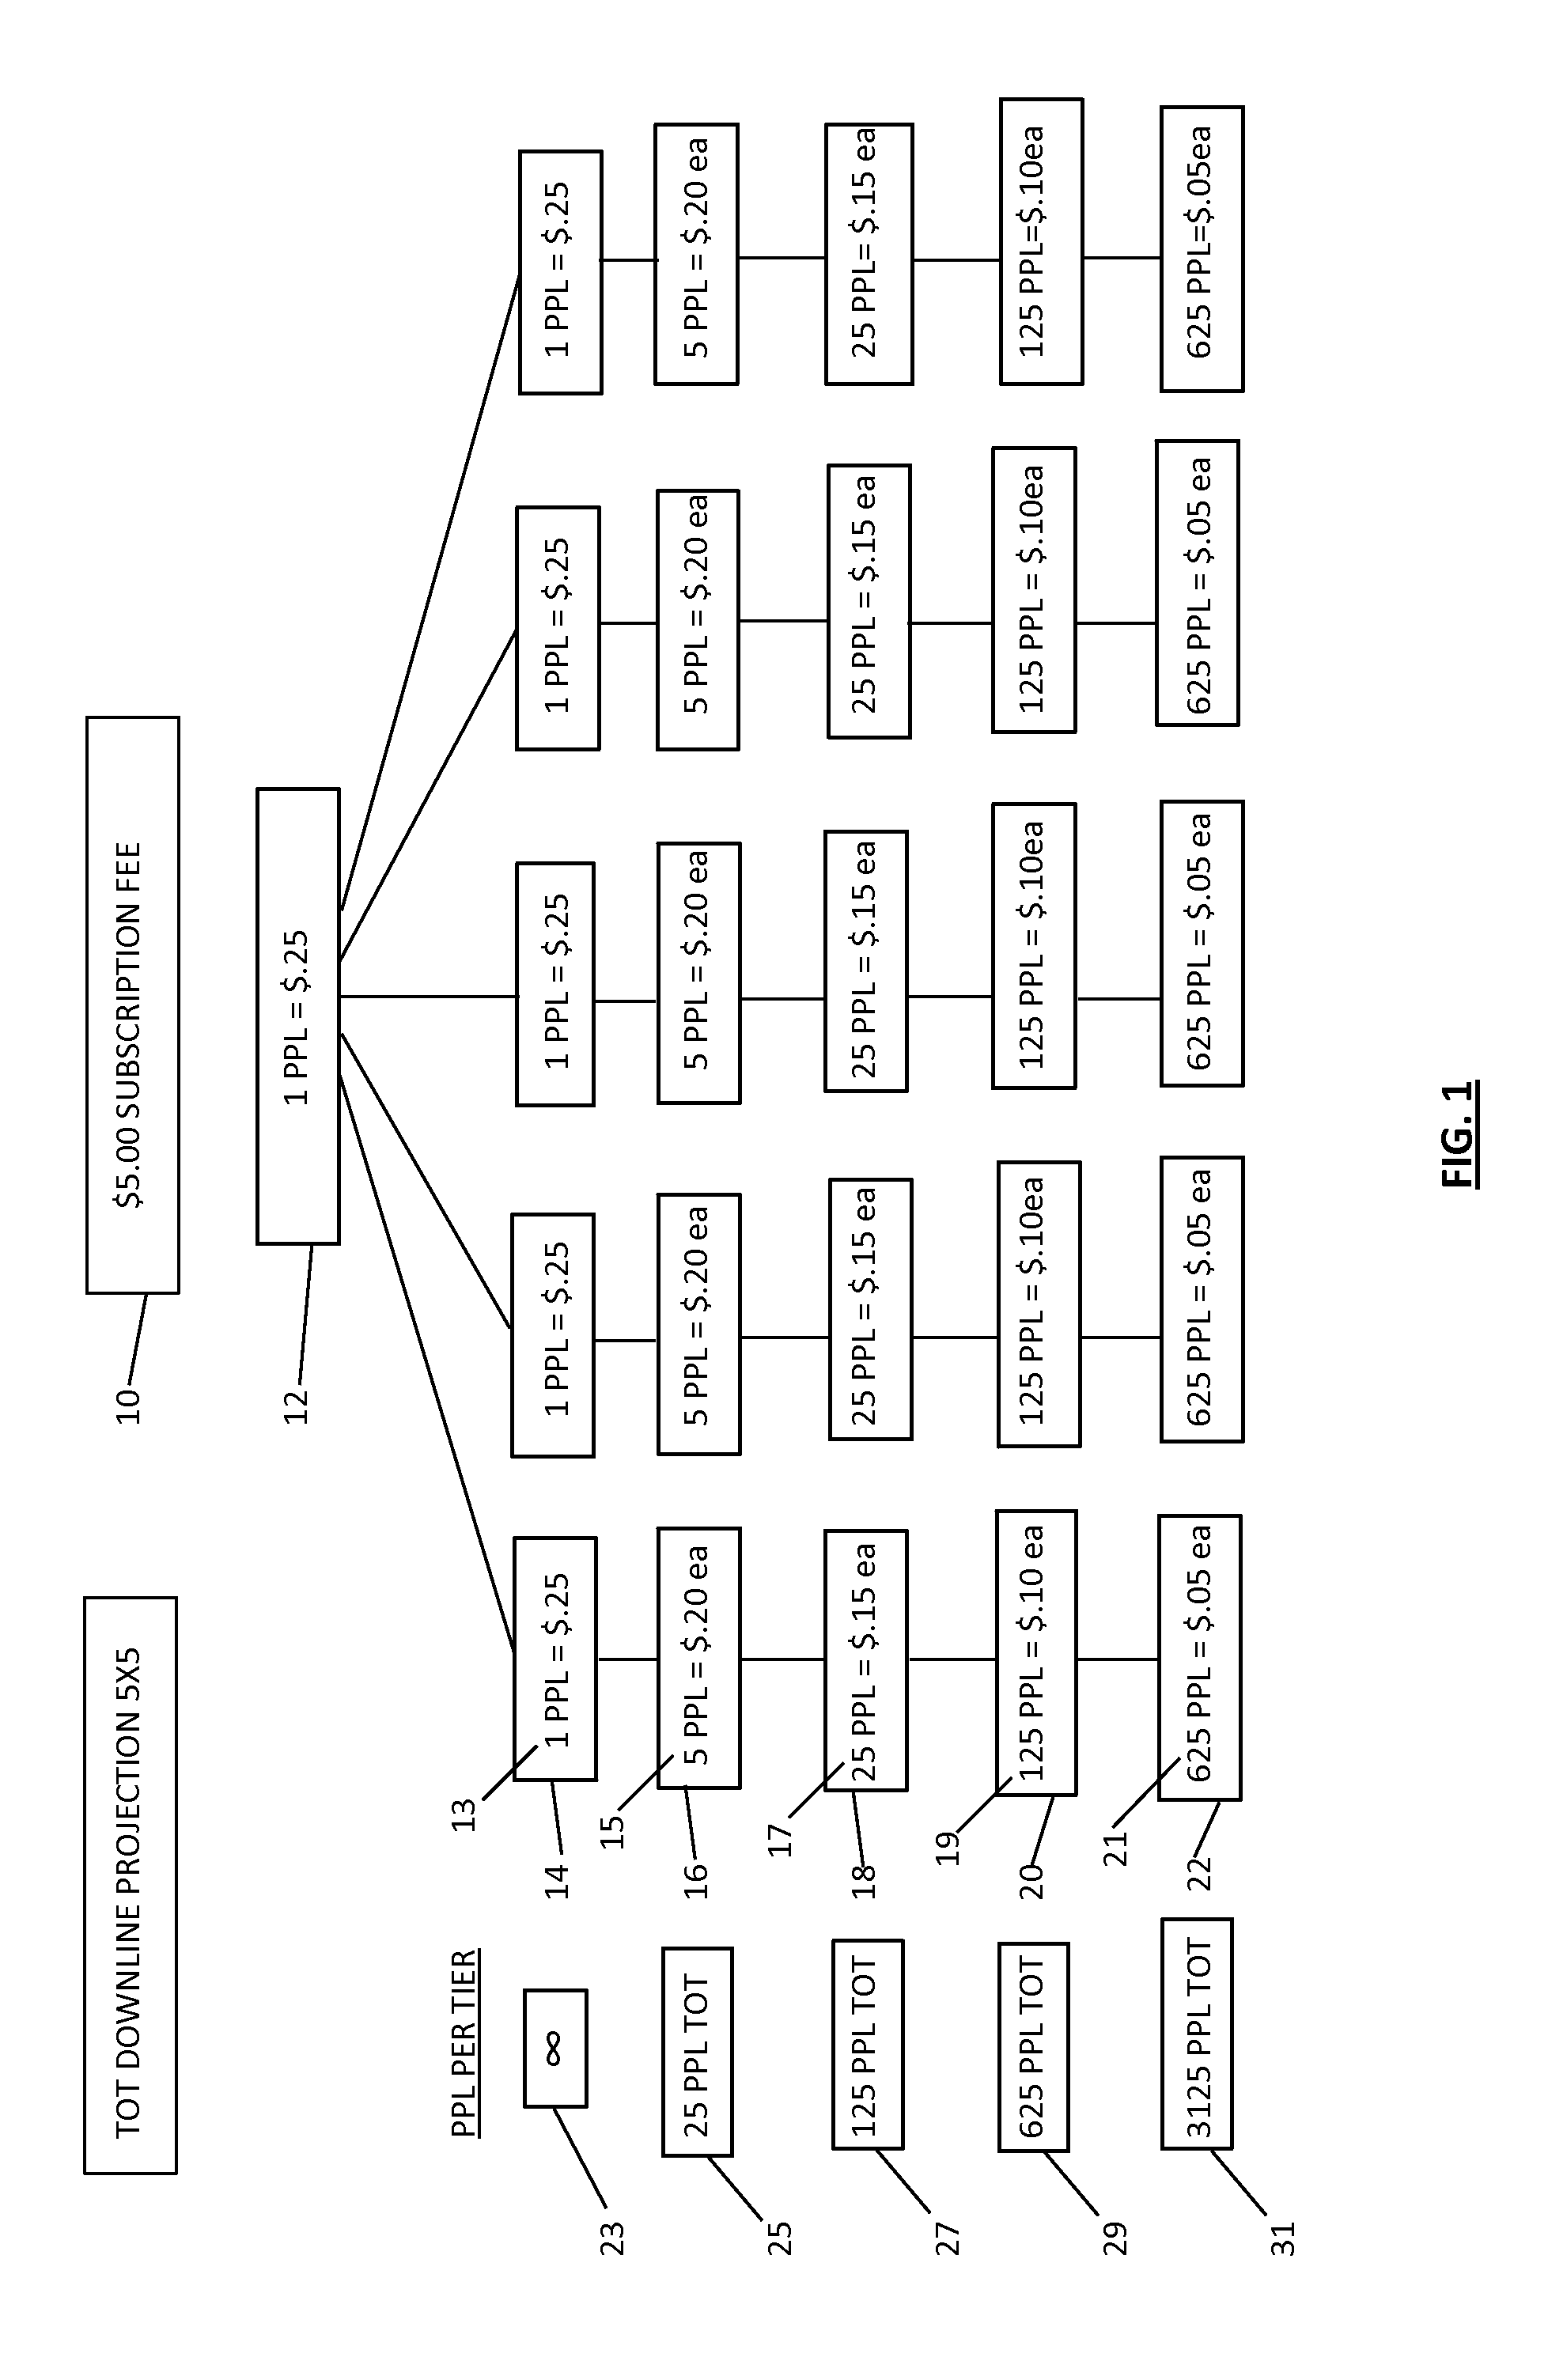 System and Methods for Role-Playing Gaming